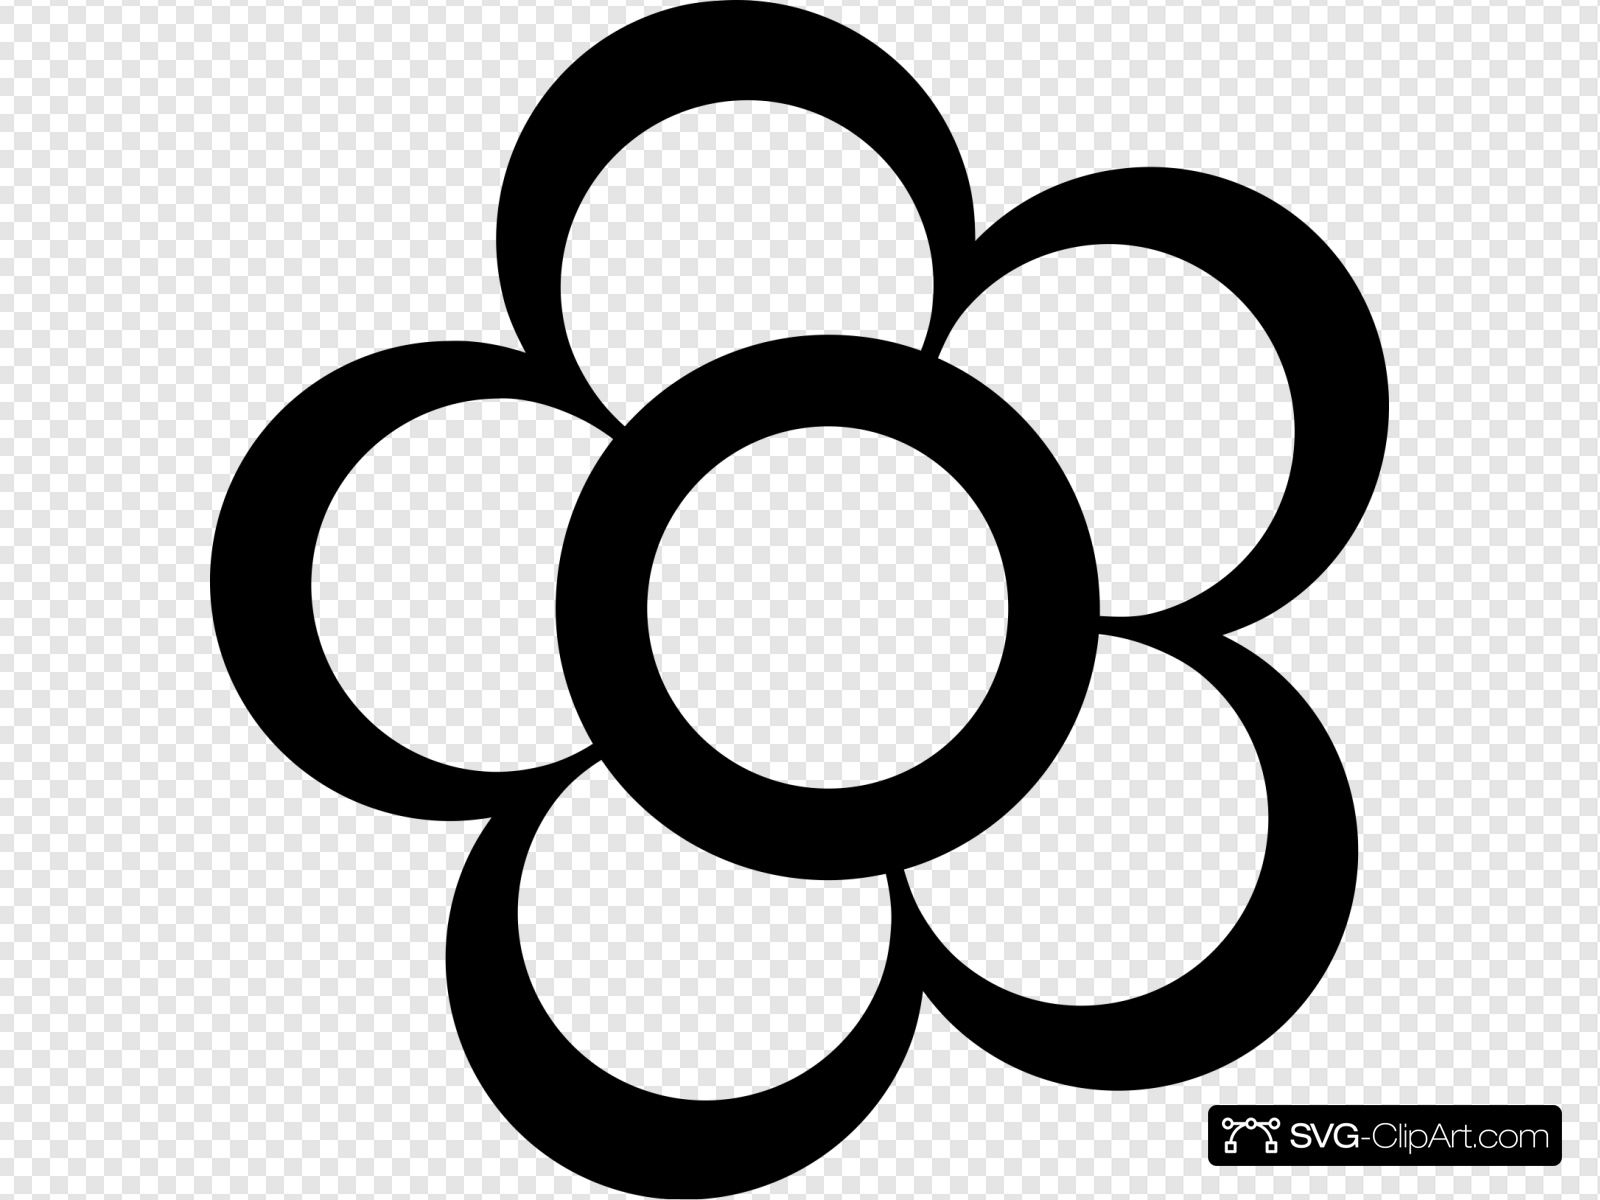 Flower Outline Clip art, Icon and SVG